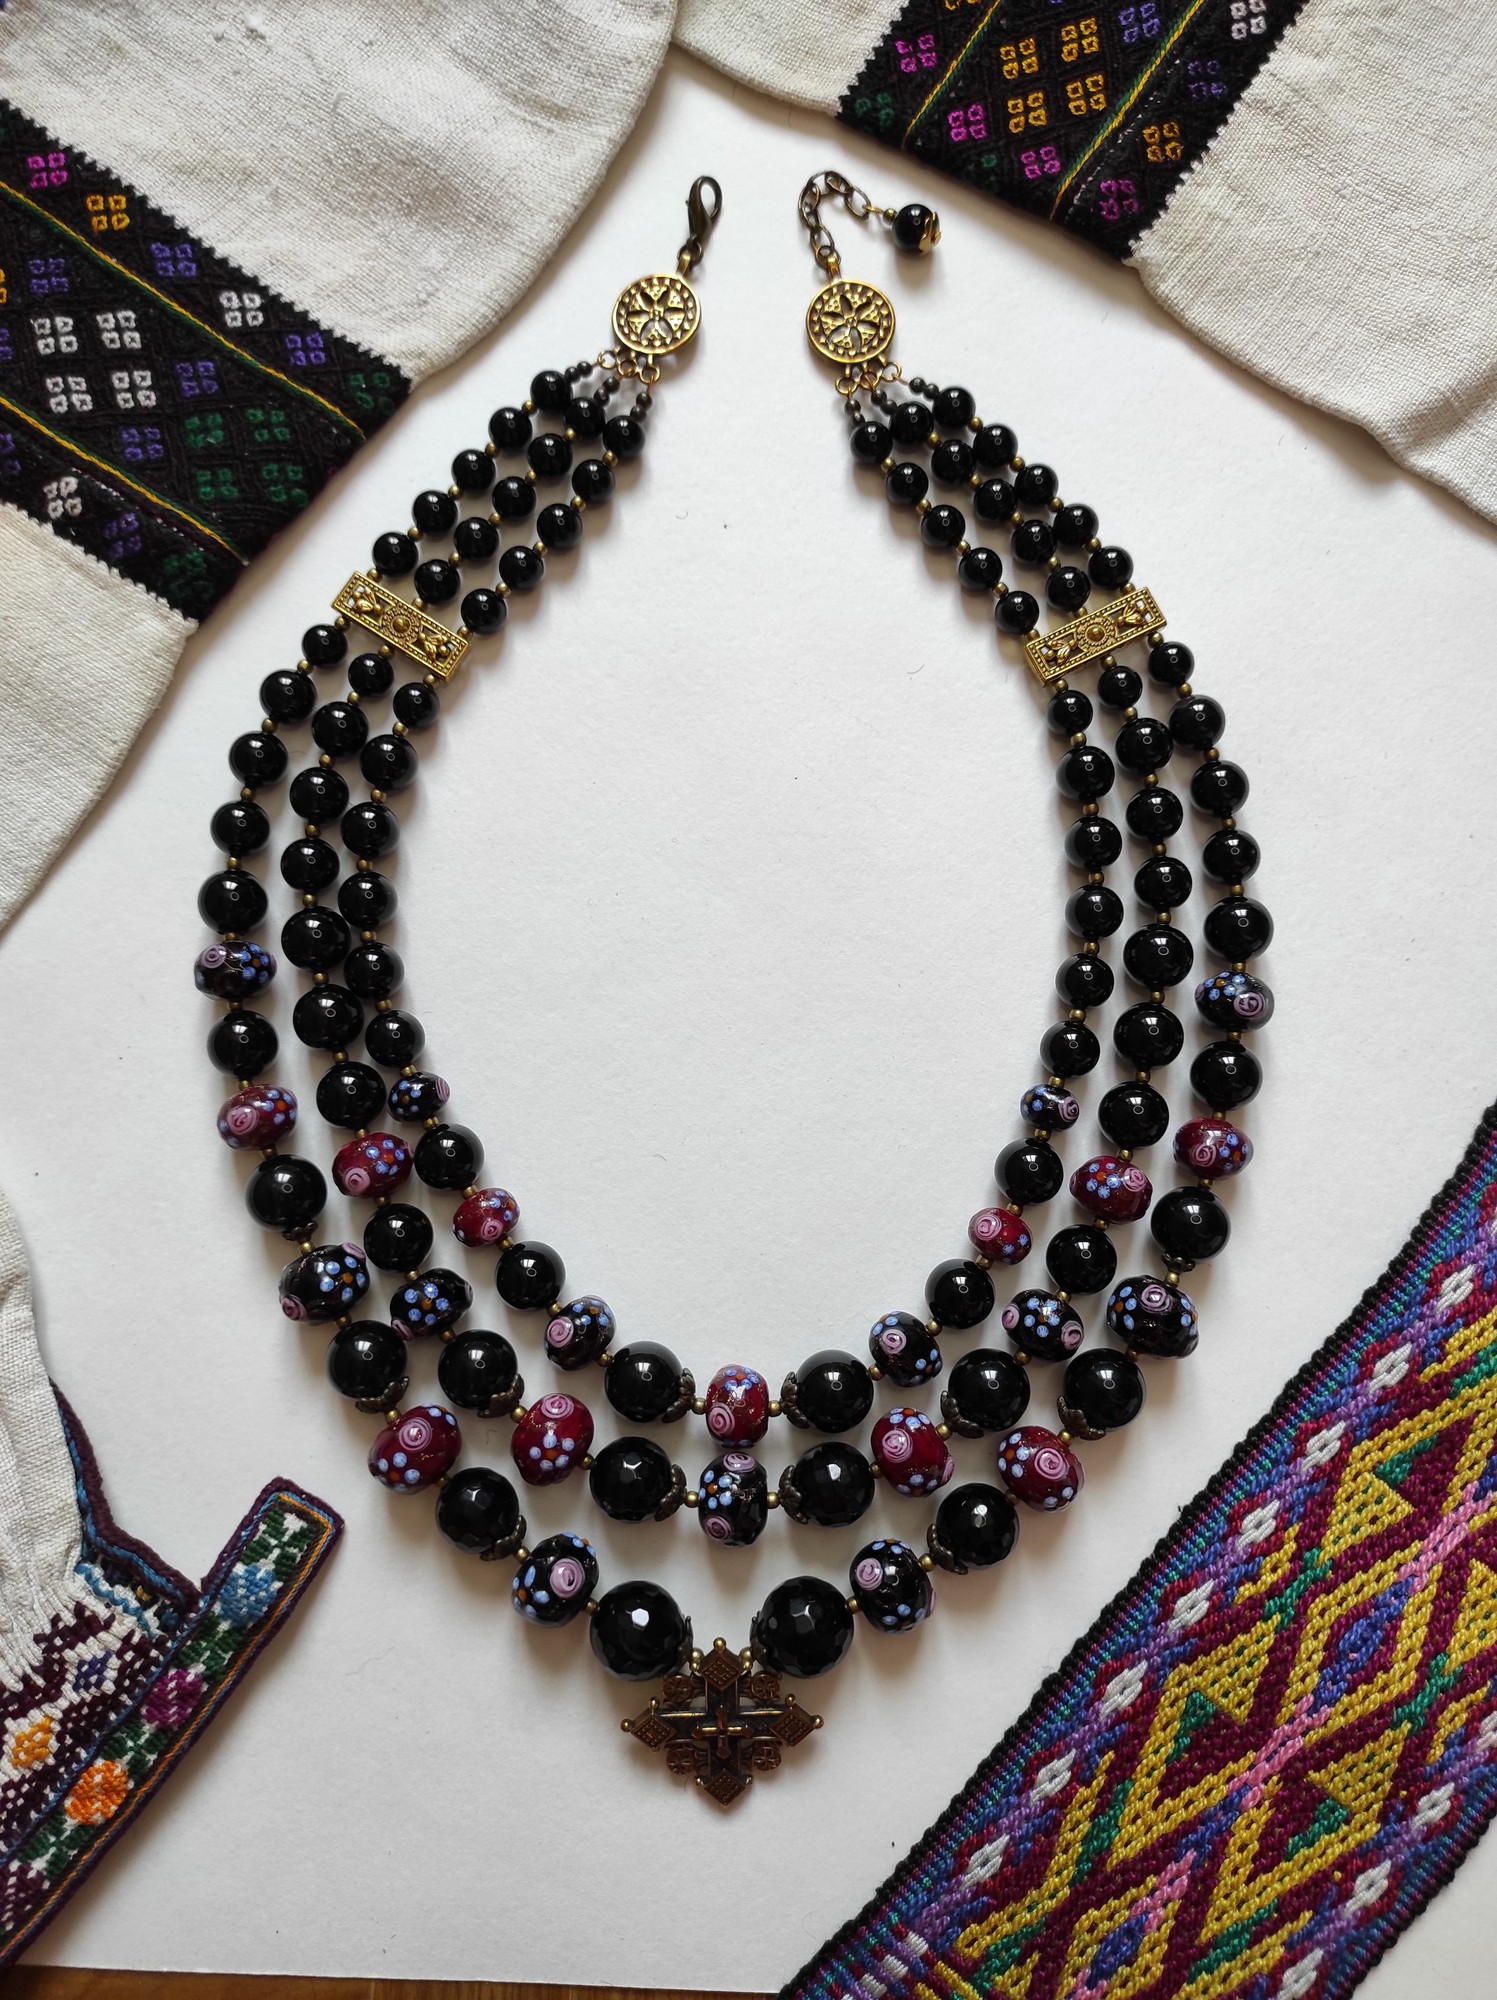 Necklace - zgarda  "Black cherries"  from glass and agate